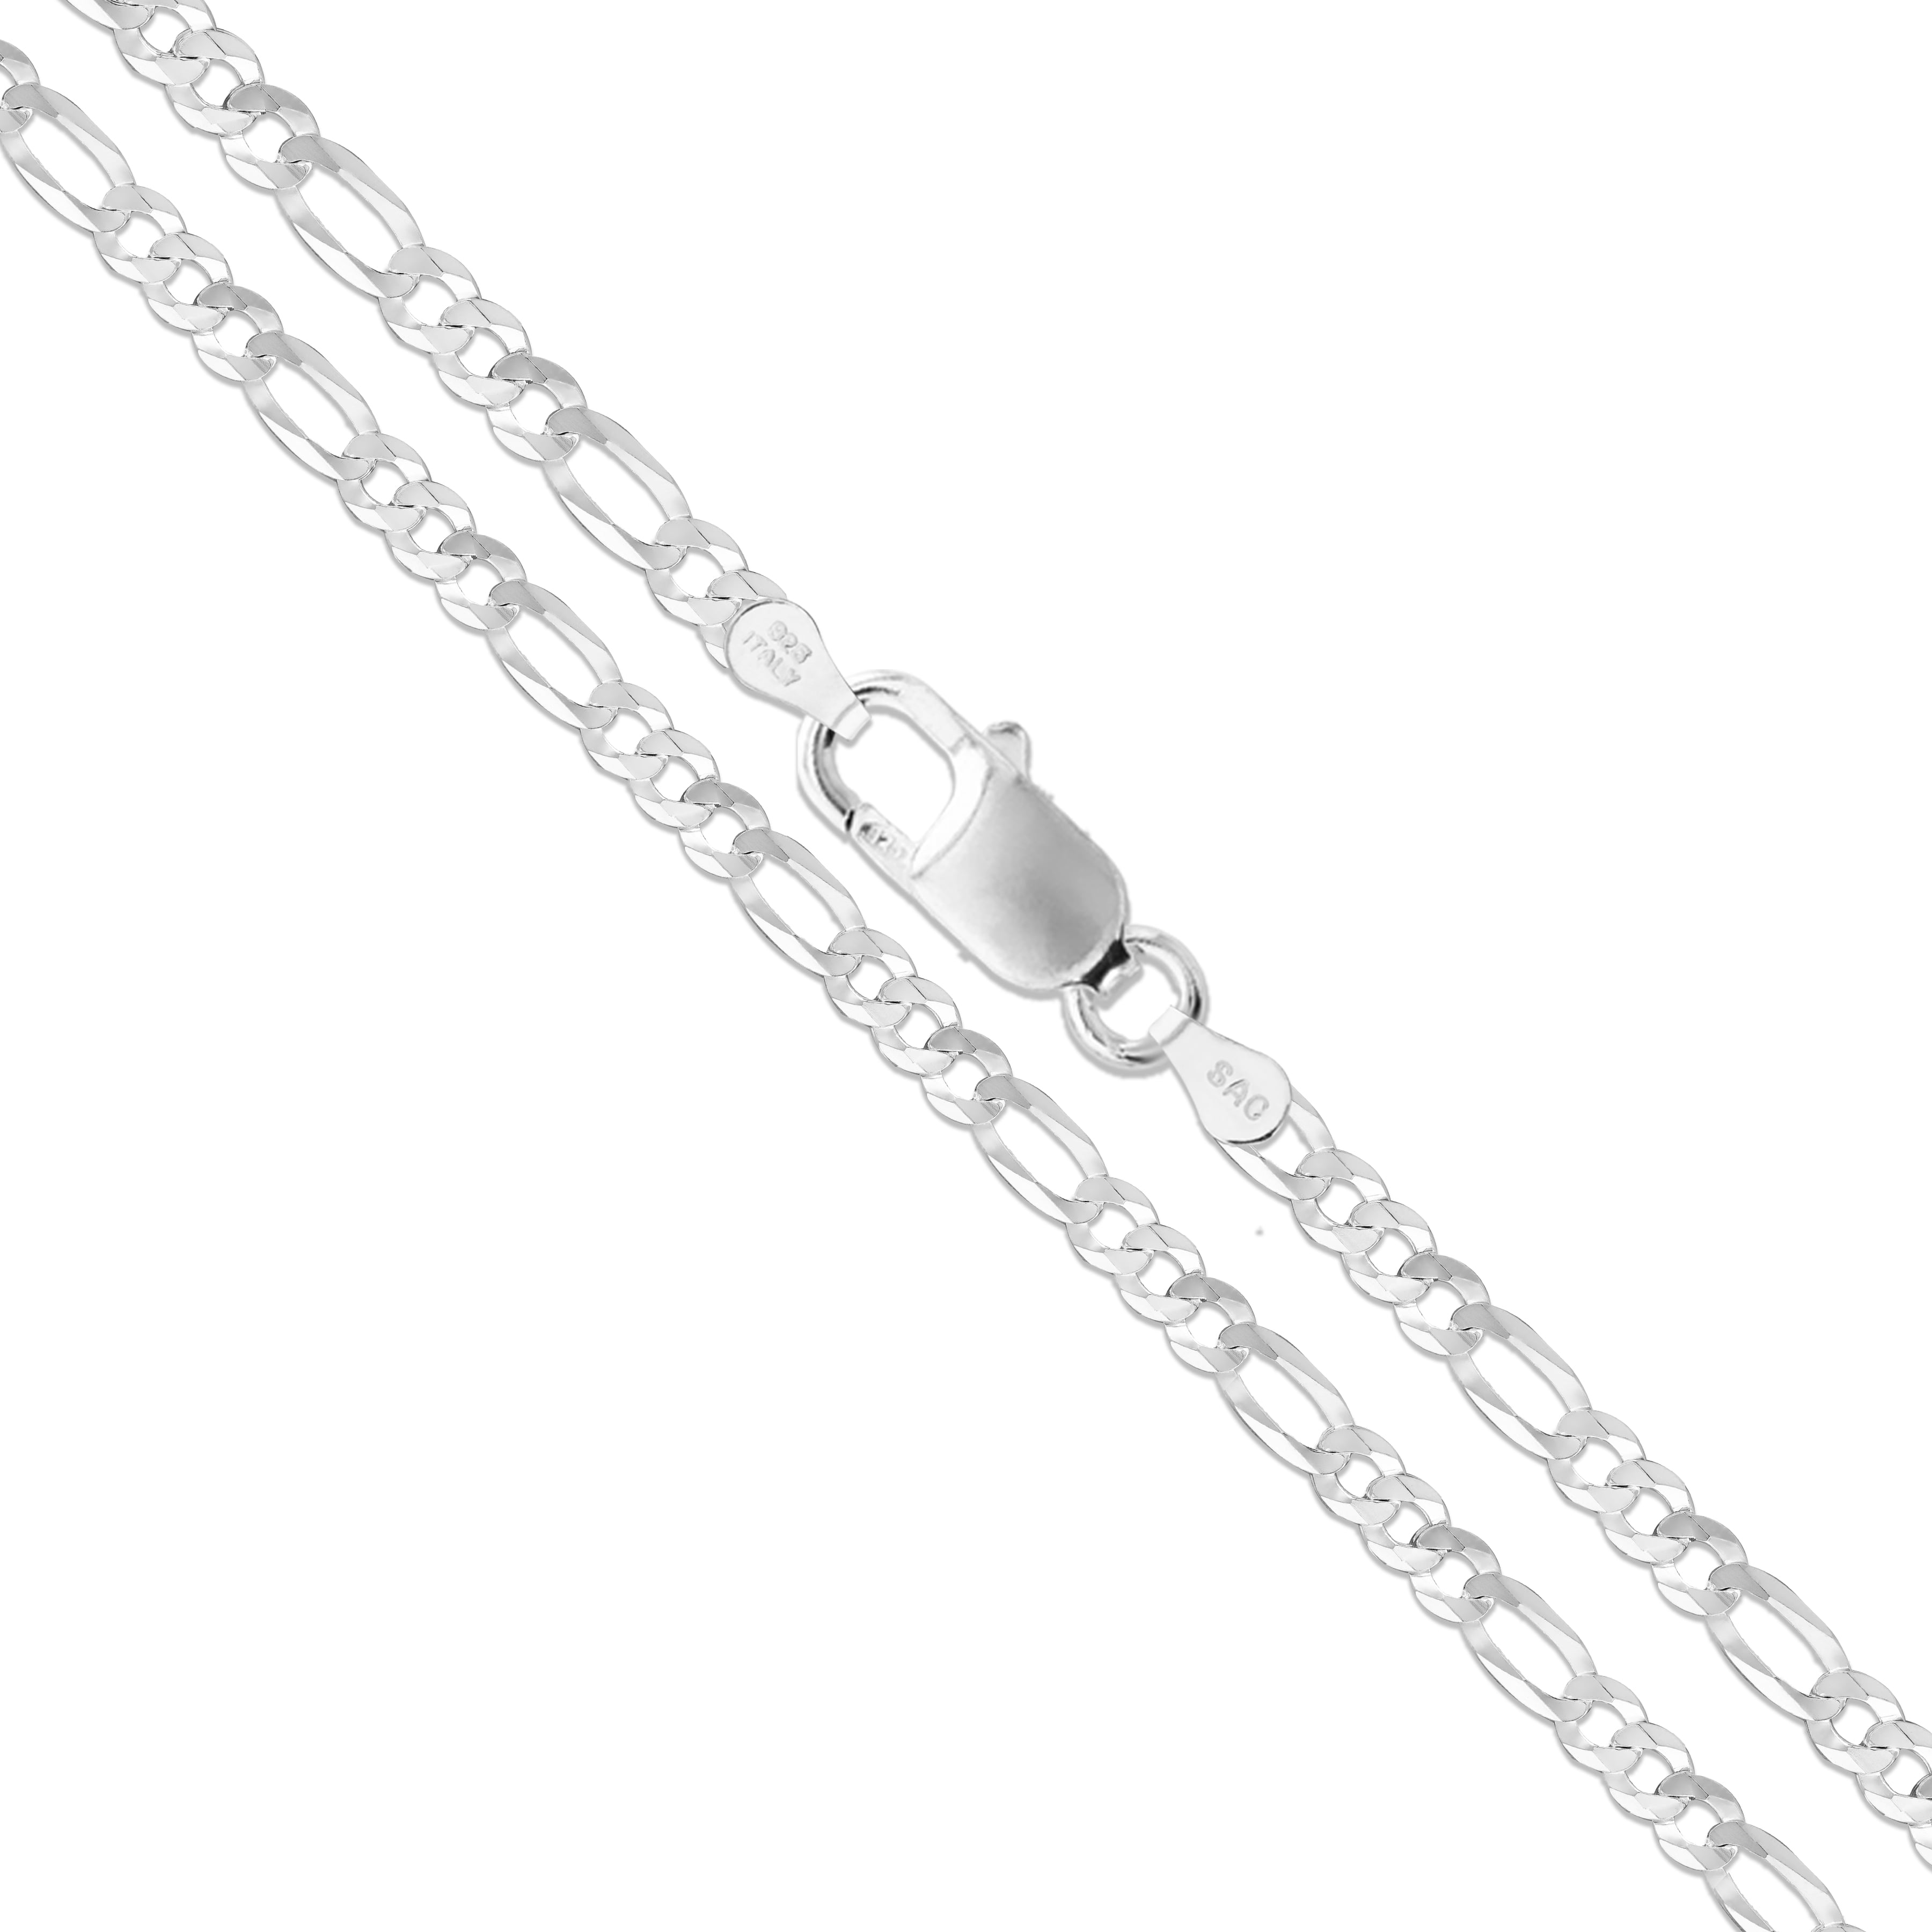 925 Sterling Silver 2.5mm 8 Side Diamond-Cut Cable Link Chain Necklace 16-30 